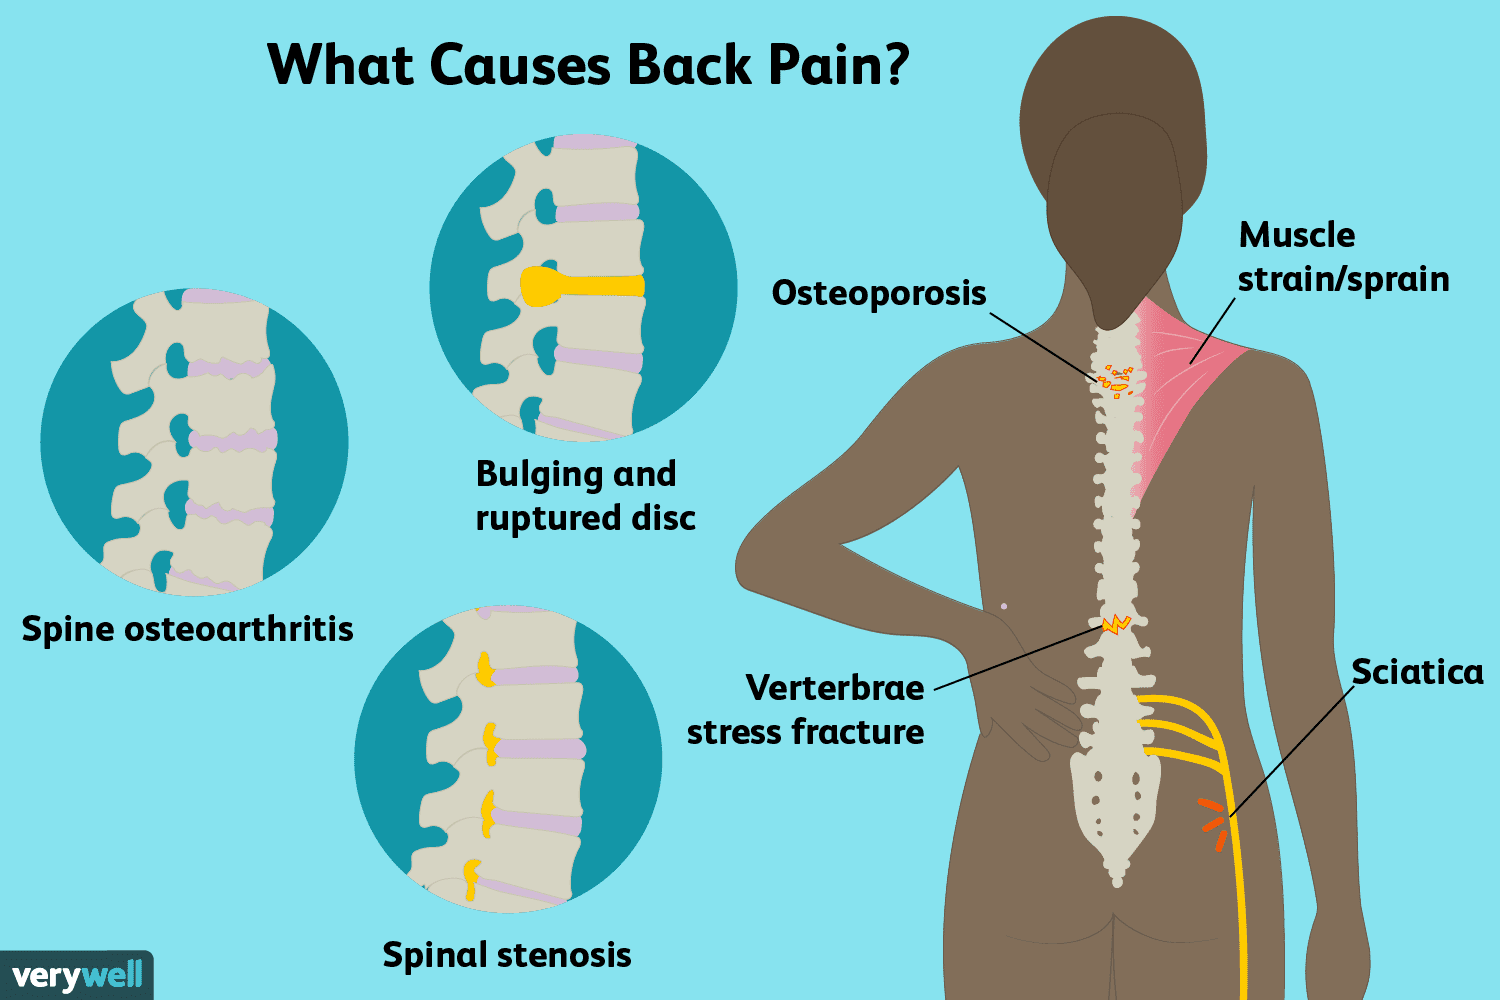 The causes of back pain